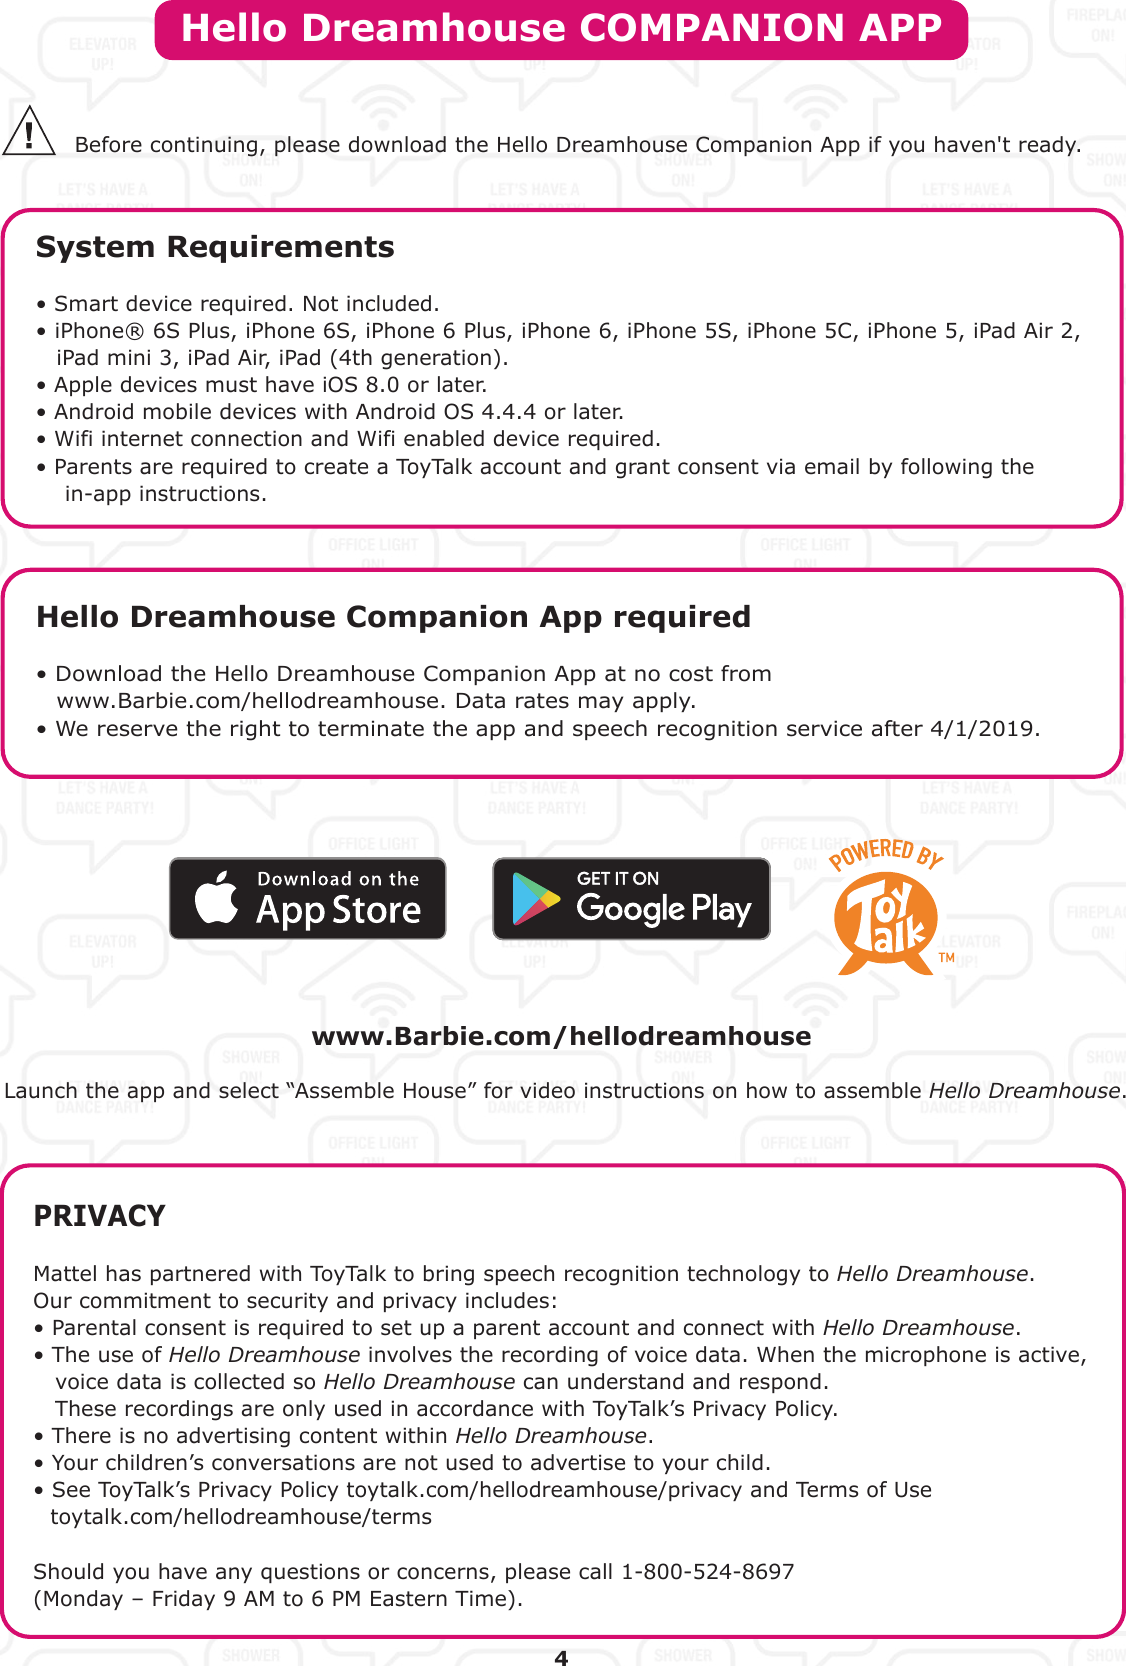 Hello Dreamhouse COMPANION APPSystem Requirements• Smart device required. Not included. • iPhone® 6S Plus, iPhone 6S, iPhone 6 Plus, iPhone 6, iPhone 5S, iPhone 5C, iPhone 5, iPad Air 2, iPad mini 3, iPad Air, iPad (4th generation).• Apple devices must have iOS 8.0 or later.• Android mobile devices with Android OS 4.4.4 or later.• Wifi internet connection and Wifi enabled device required.• Parents are required to create a ToyTalk account and grant consent via email by following the     in-app instructions.PRIVACYMattel has partnered with ToyTalk to bring speech recognition technology to Hello Dreamhouse.Our commitment to security and privacy includes:• Parental consent is required to set up a parent account and connect with Hello Dreamhouse.• The use of Hello Dreamhouse involves the recording of voice data. When the microphone is active,    voice data is collected so Hello Dreamhouse can understand and respond.    These recordings are only used in accordance with ToyTalk’s Privacy Policy.• There is no advertising content within Hello Dreamhouse.• Your children’s conversations are not used to advertise to your child.• See ToyTalk’s Privacy Policy toytalk.com/hellodreamhouse/privacy and Terms of Use toytalk.com/hellodreamhouse/termsShould you have any questions or concerns, please call 1-800-524-8697 (Monday – Friday 9 AM to 6 PM Eastern Time).Hello Dreamhouse Companion App required• Download the Hello Dreamhouse Companion App at no cost from  www.Barbie.com/hellodreamhouse. Data rates may apply.• We reserve the right to terminate the app and speech recognition service after 4/1/2019.Before continuing, please download the Hello Dreamhouse Companion App if you haven&apos;t ready.4www.Barbie.com/hellodreamhouseLaunch the app and select “Assemble House” for video instructions on how to assemble Hello Dreamhouse.